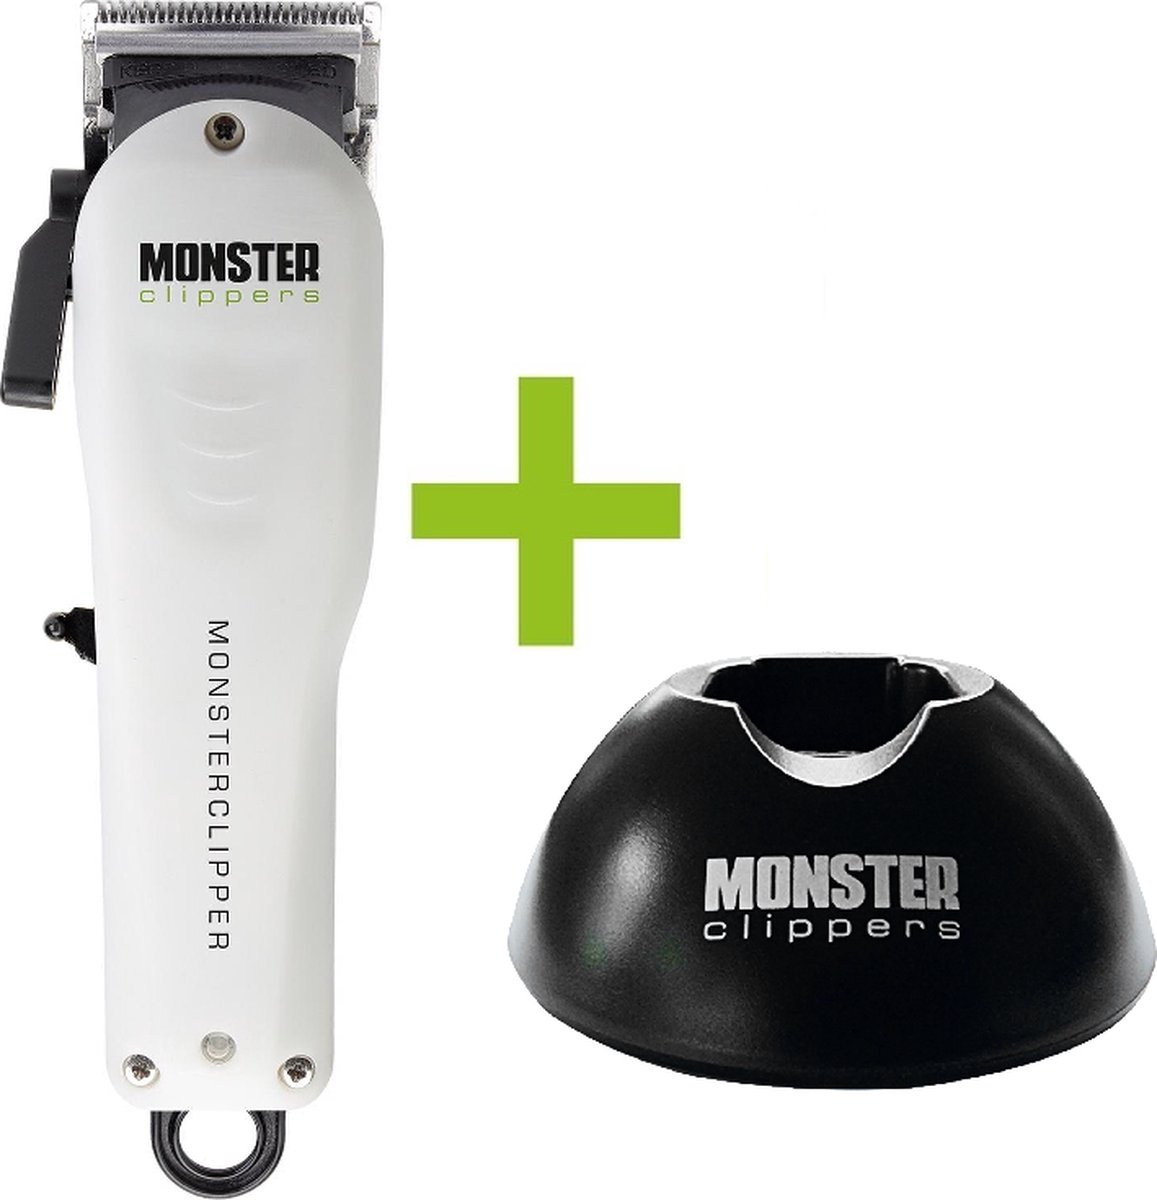 Monster Clippers Monsterclipper Taper Blade + Laadstandaard - Professionele Tondeuse - Draadloos - 6.500RPM